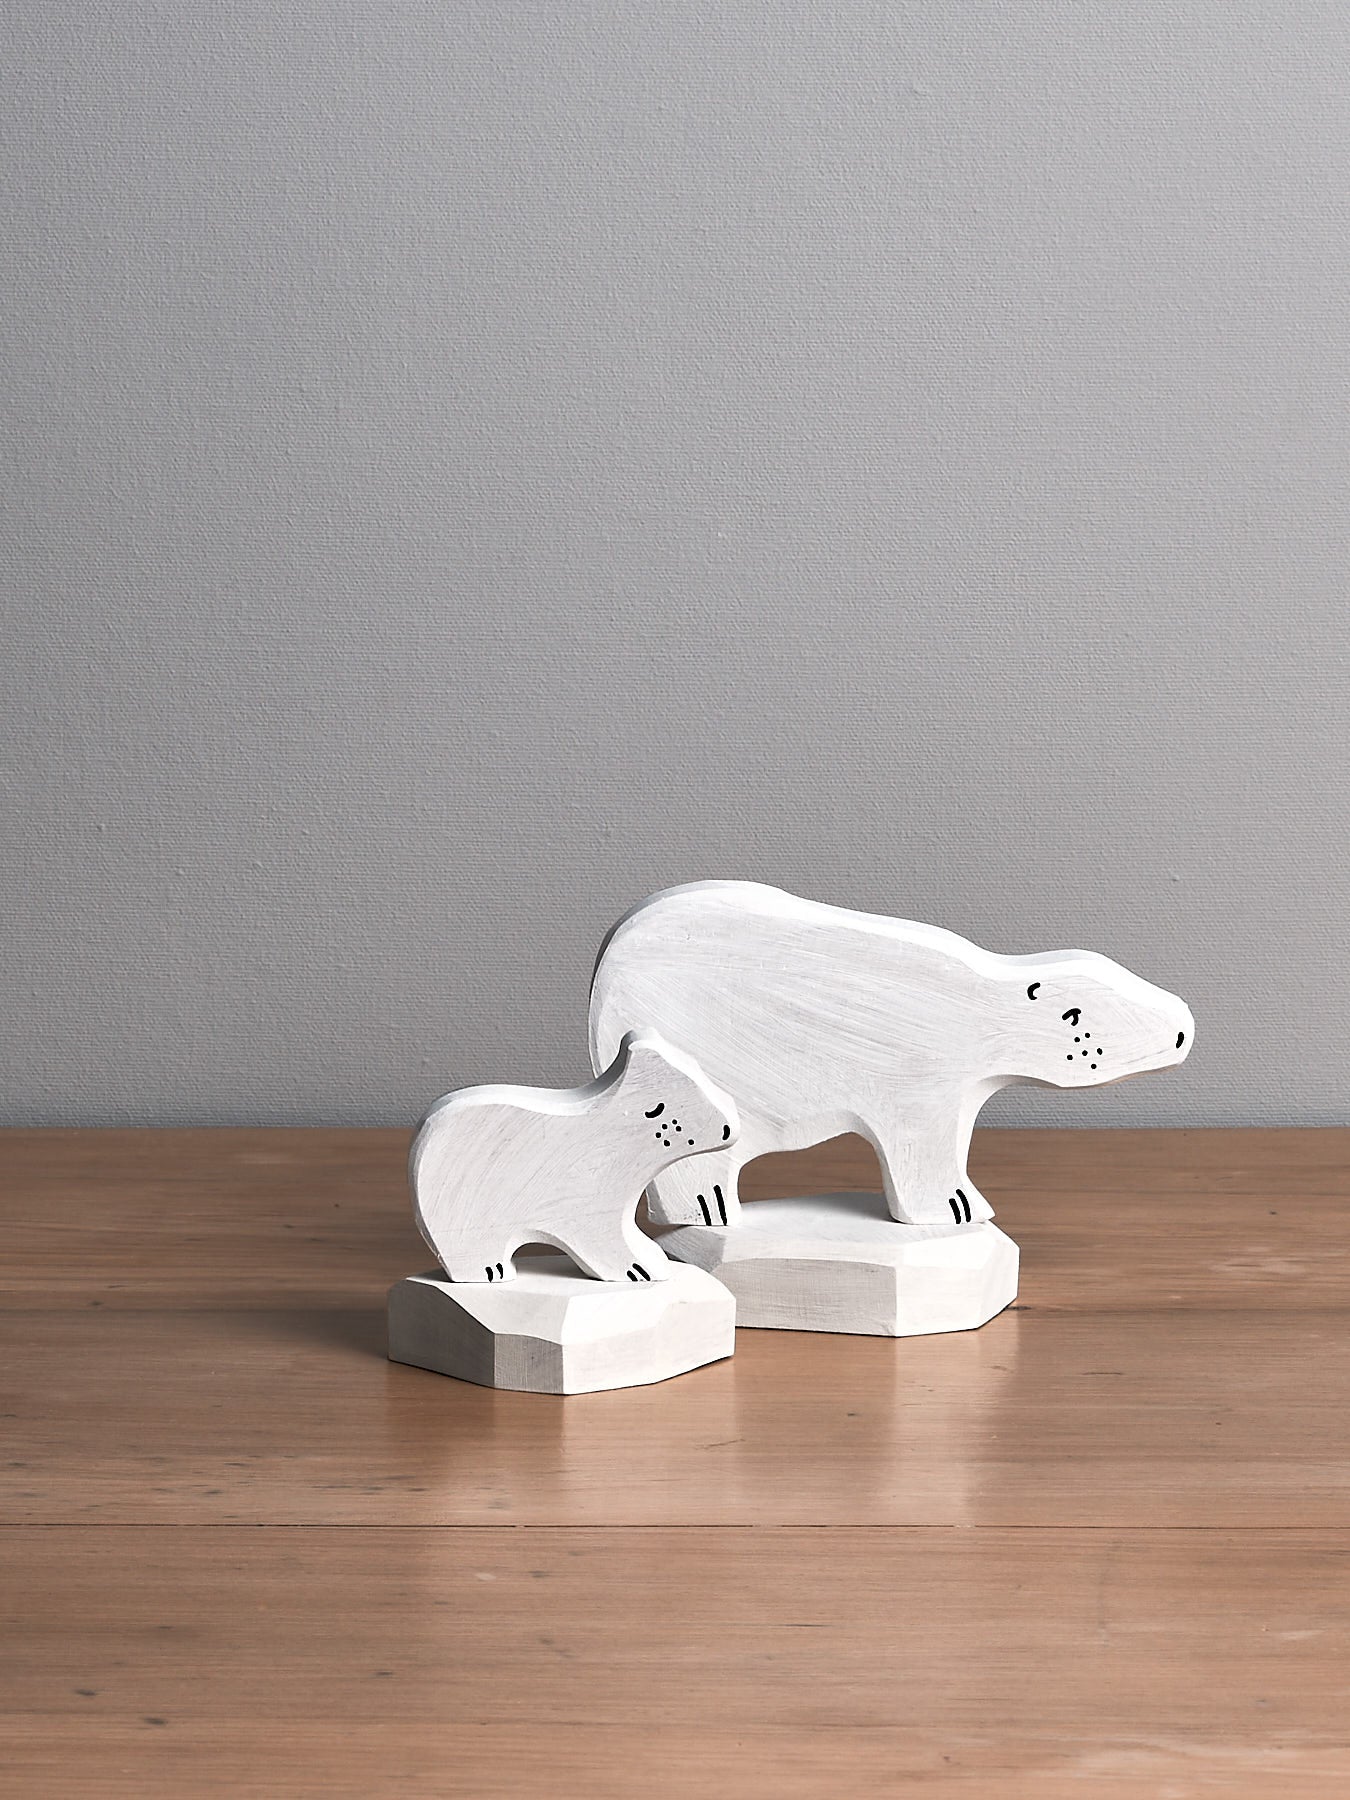 Two wooden Dean's Workshop polar bear figurines on a wooden table.